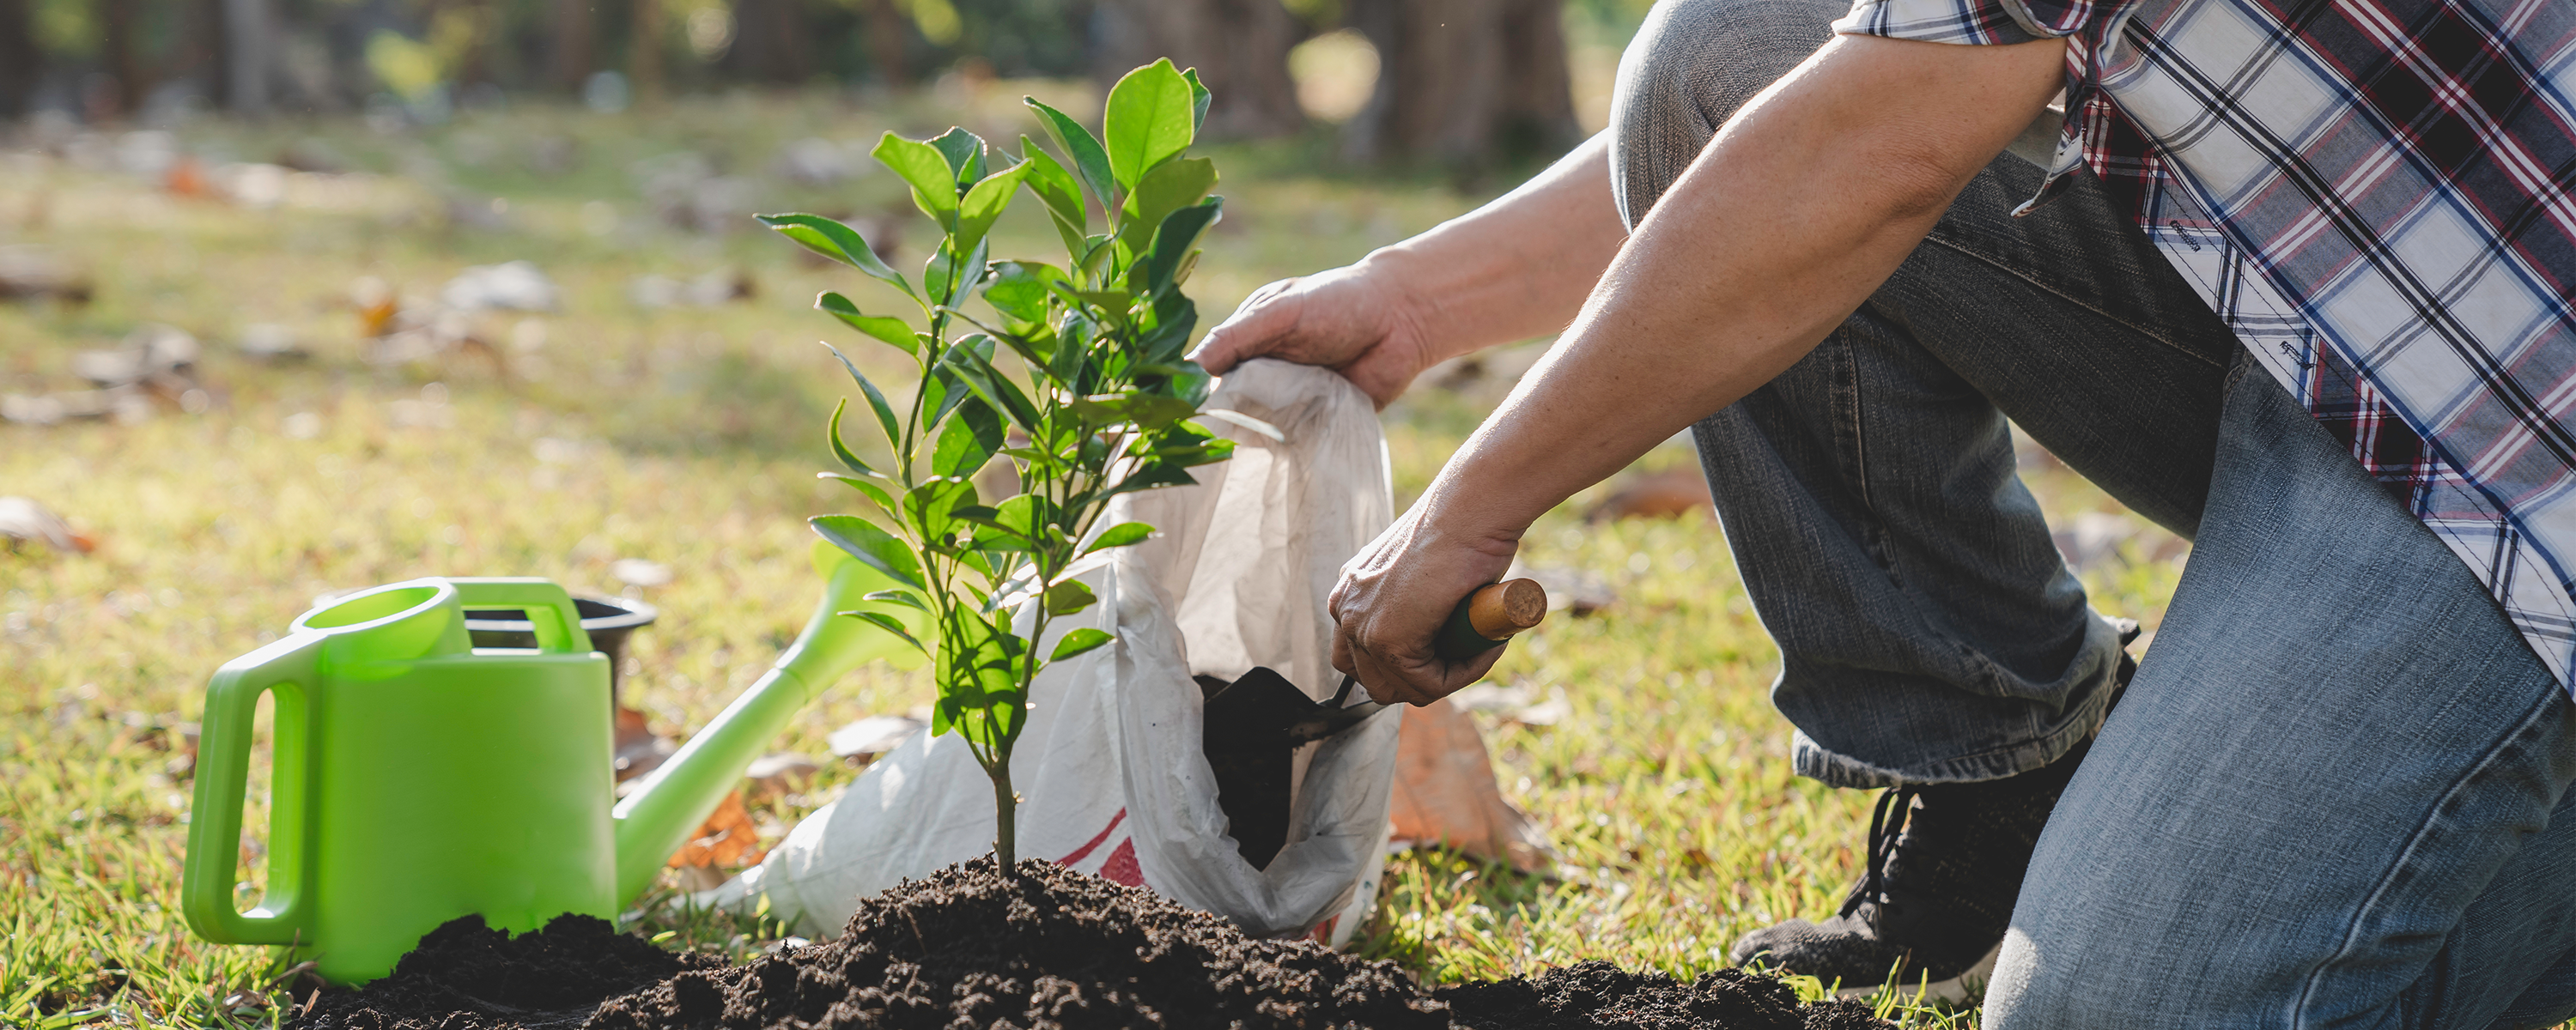 Hands planting a tree sapling in the ground with a green watering can beside it.